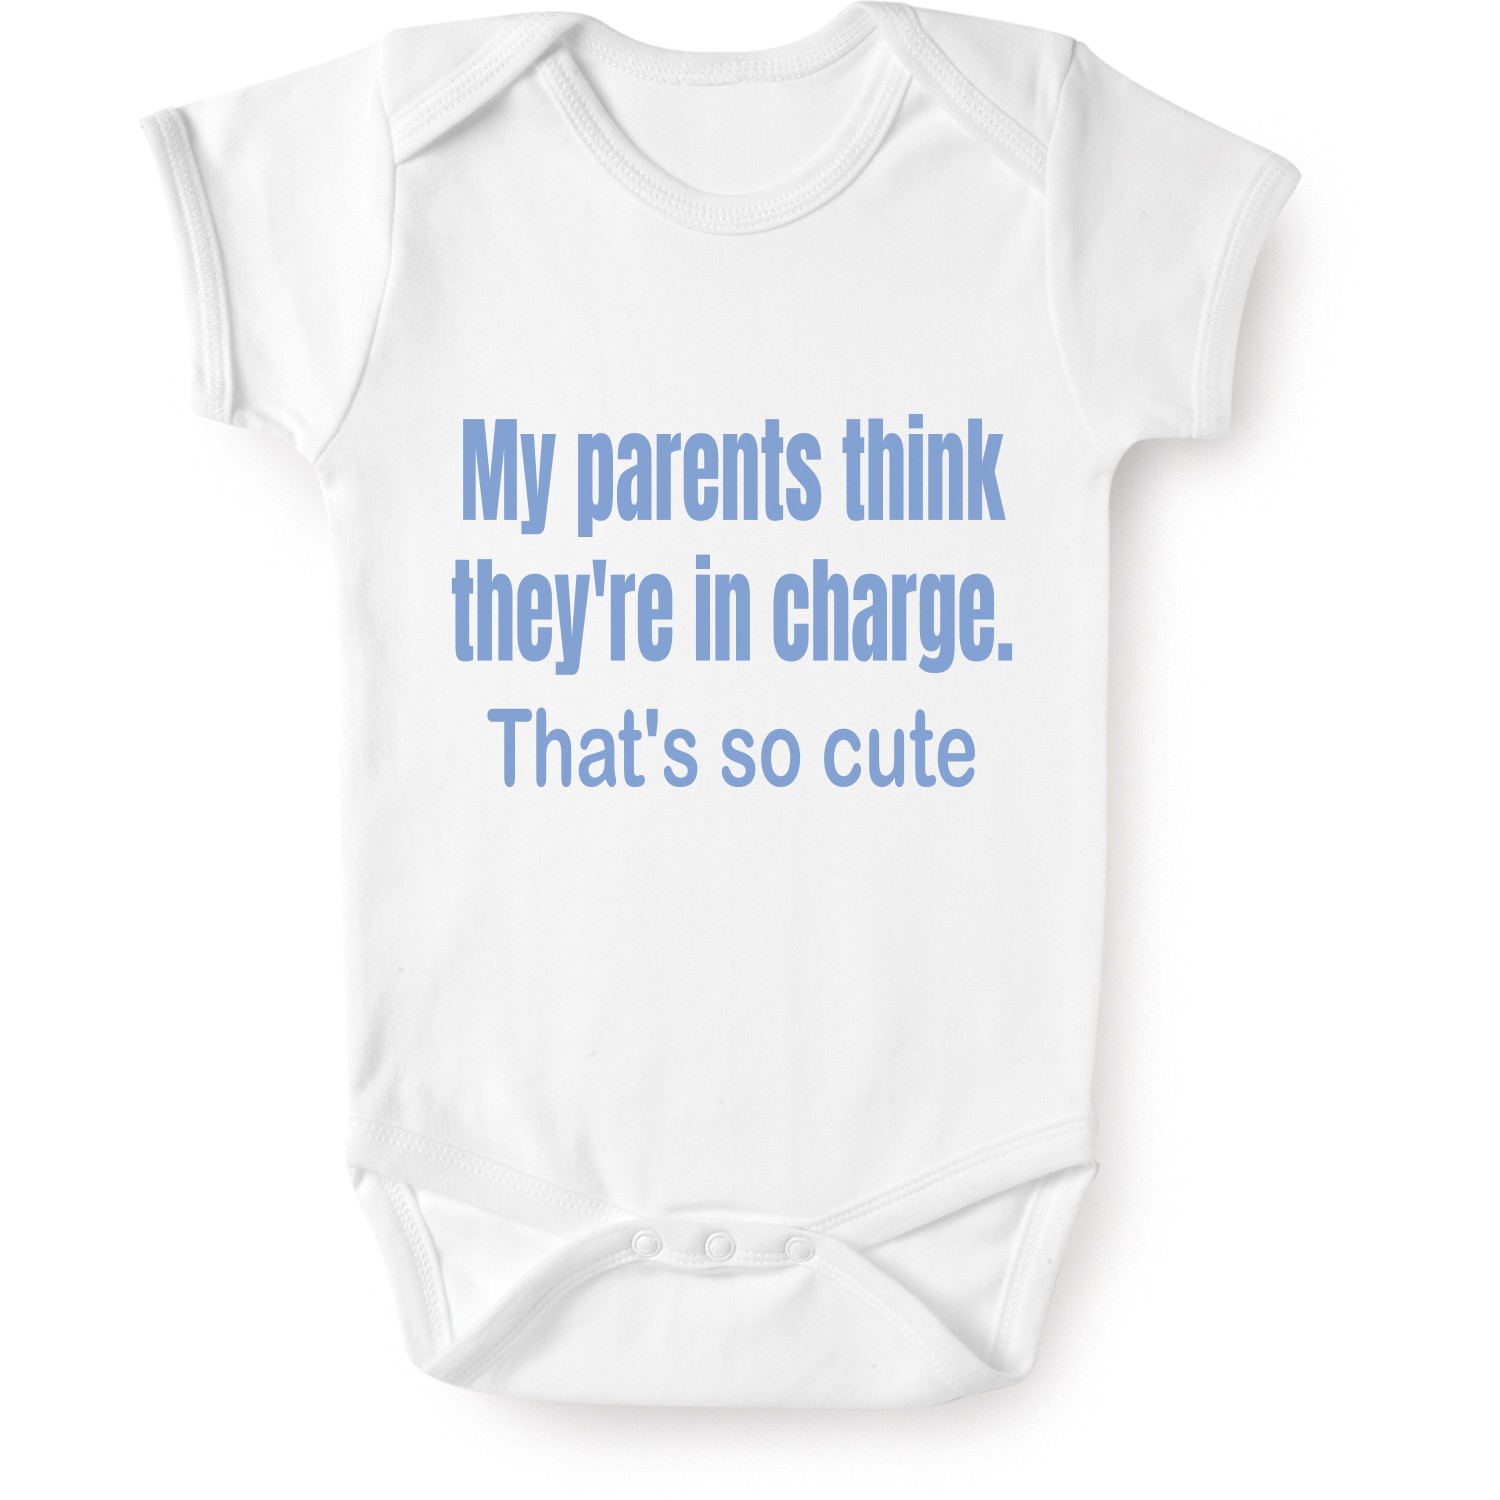 My Parents Think They're In Charge. That's So Cute Shirts | What on Earth